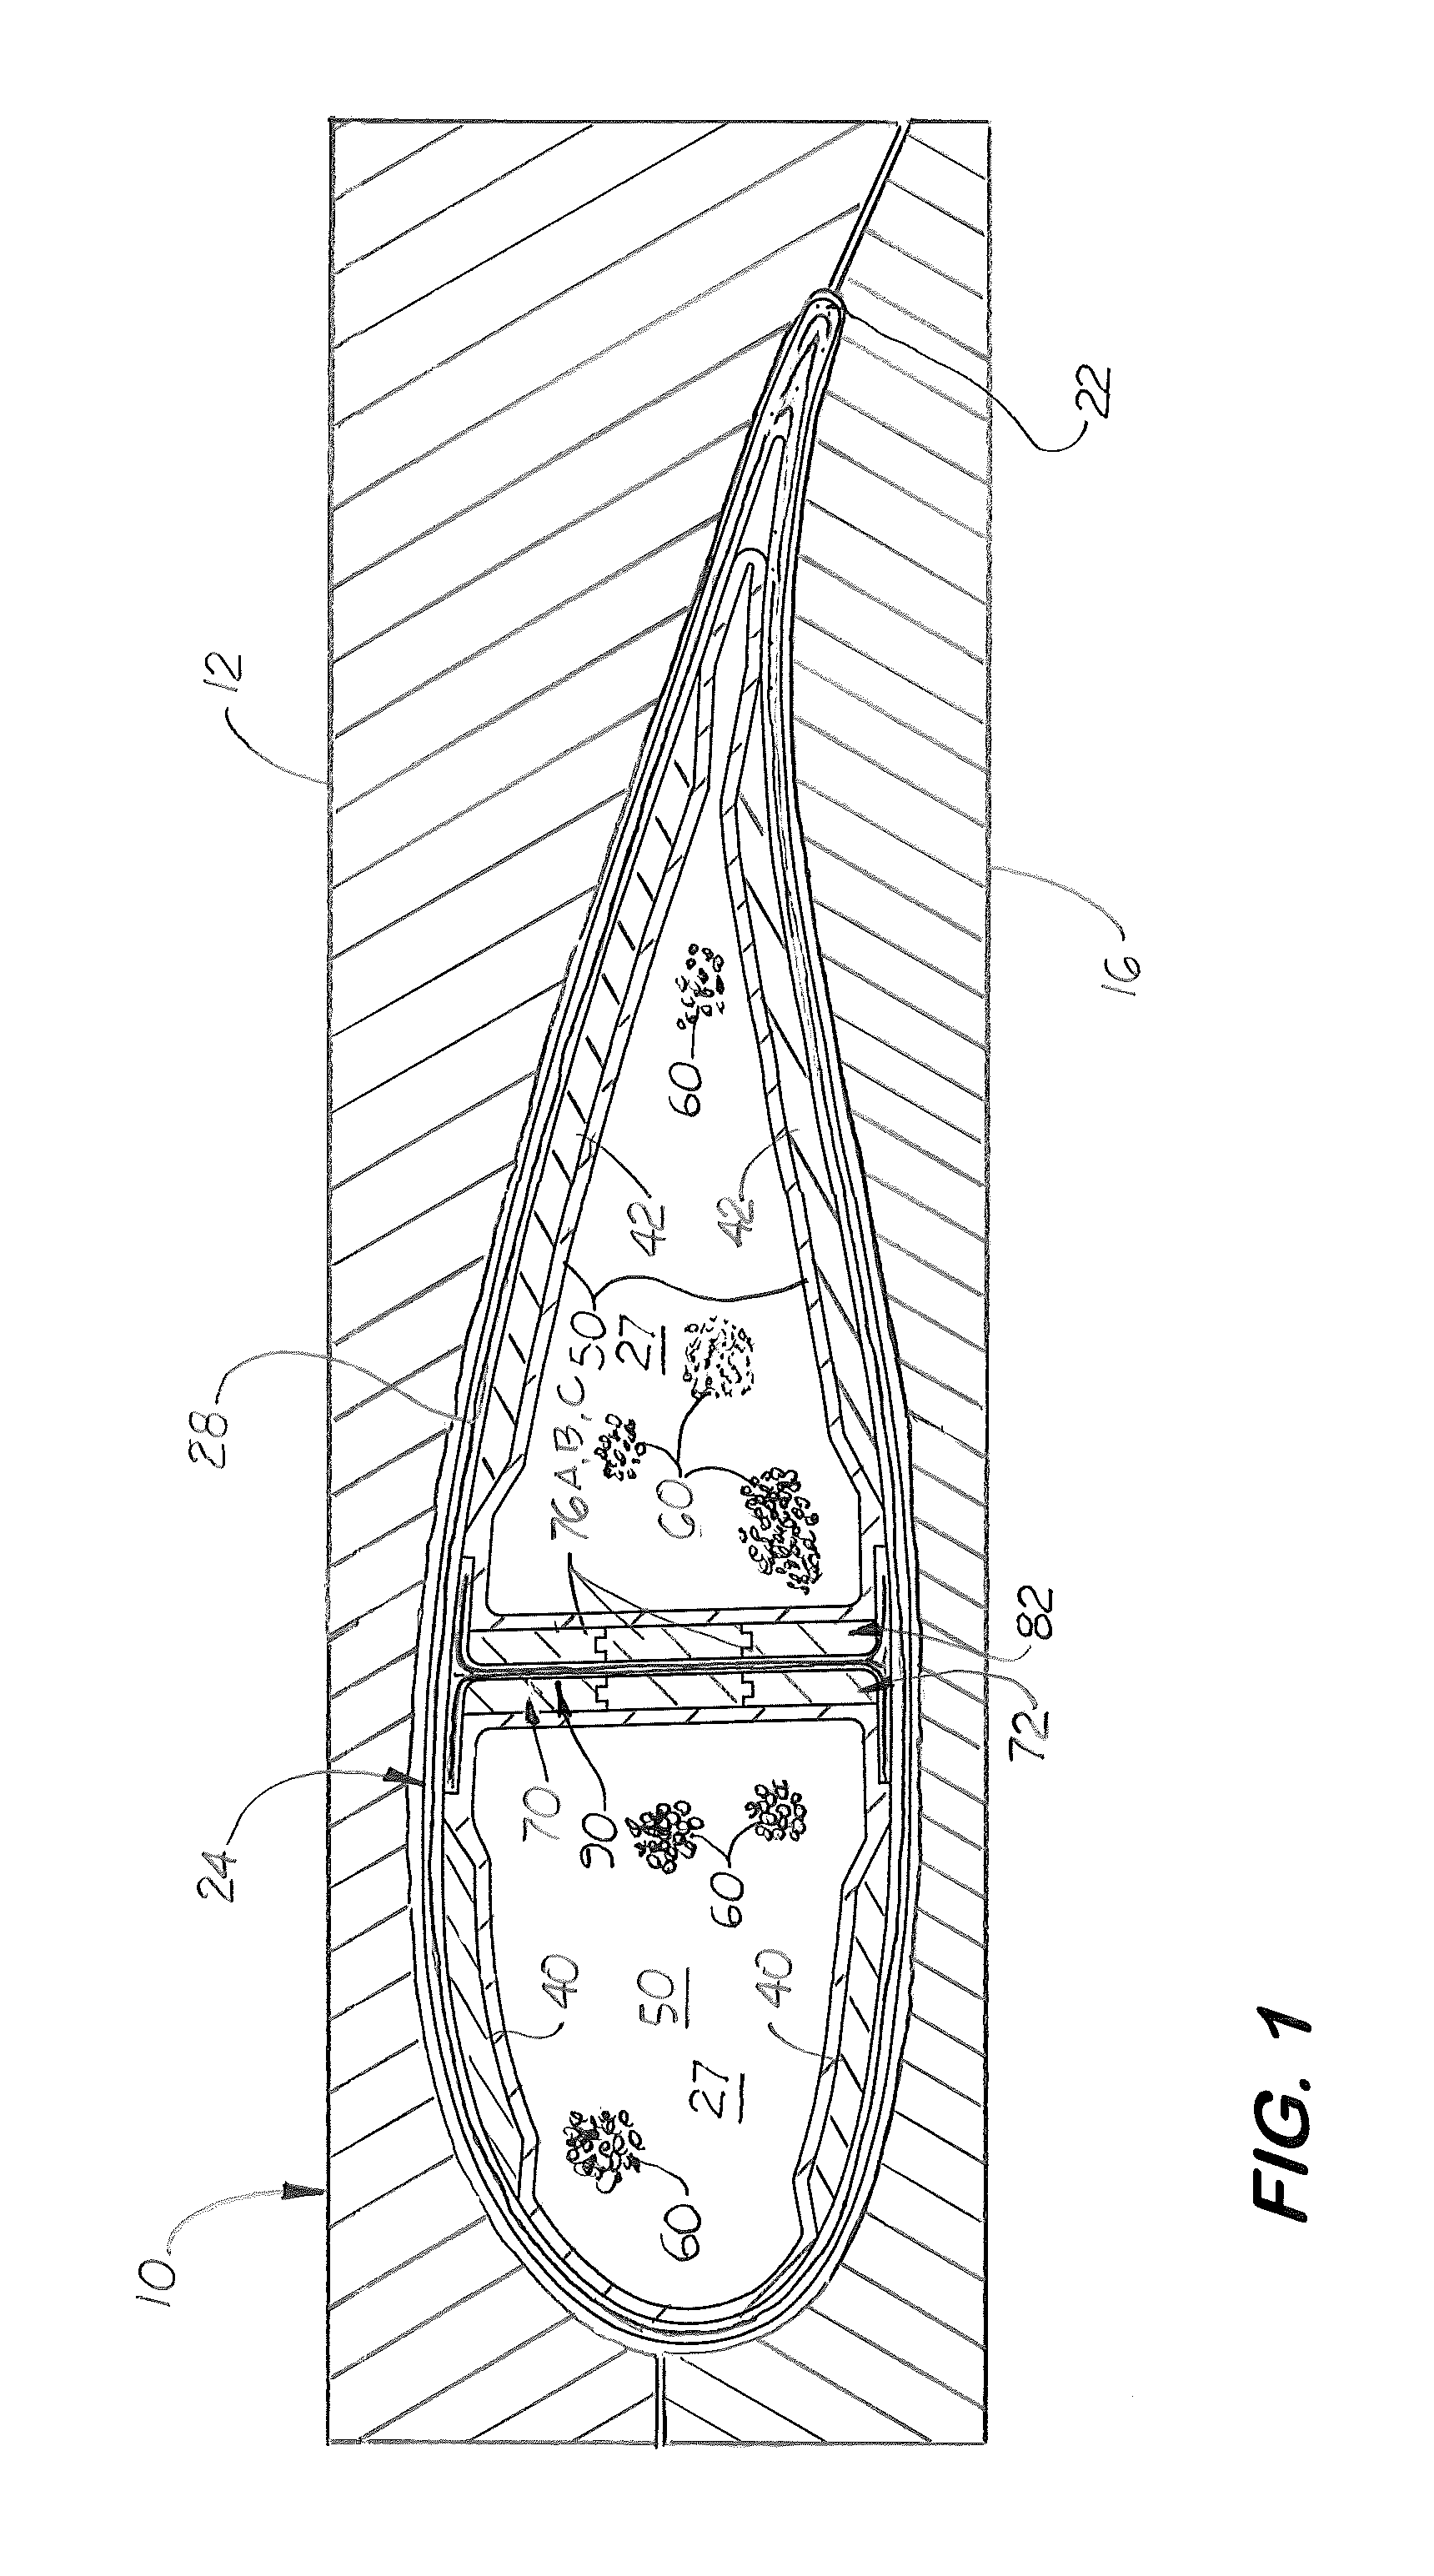 Method of manufacturing hollow composite parts with in situ formed internal structures